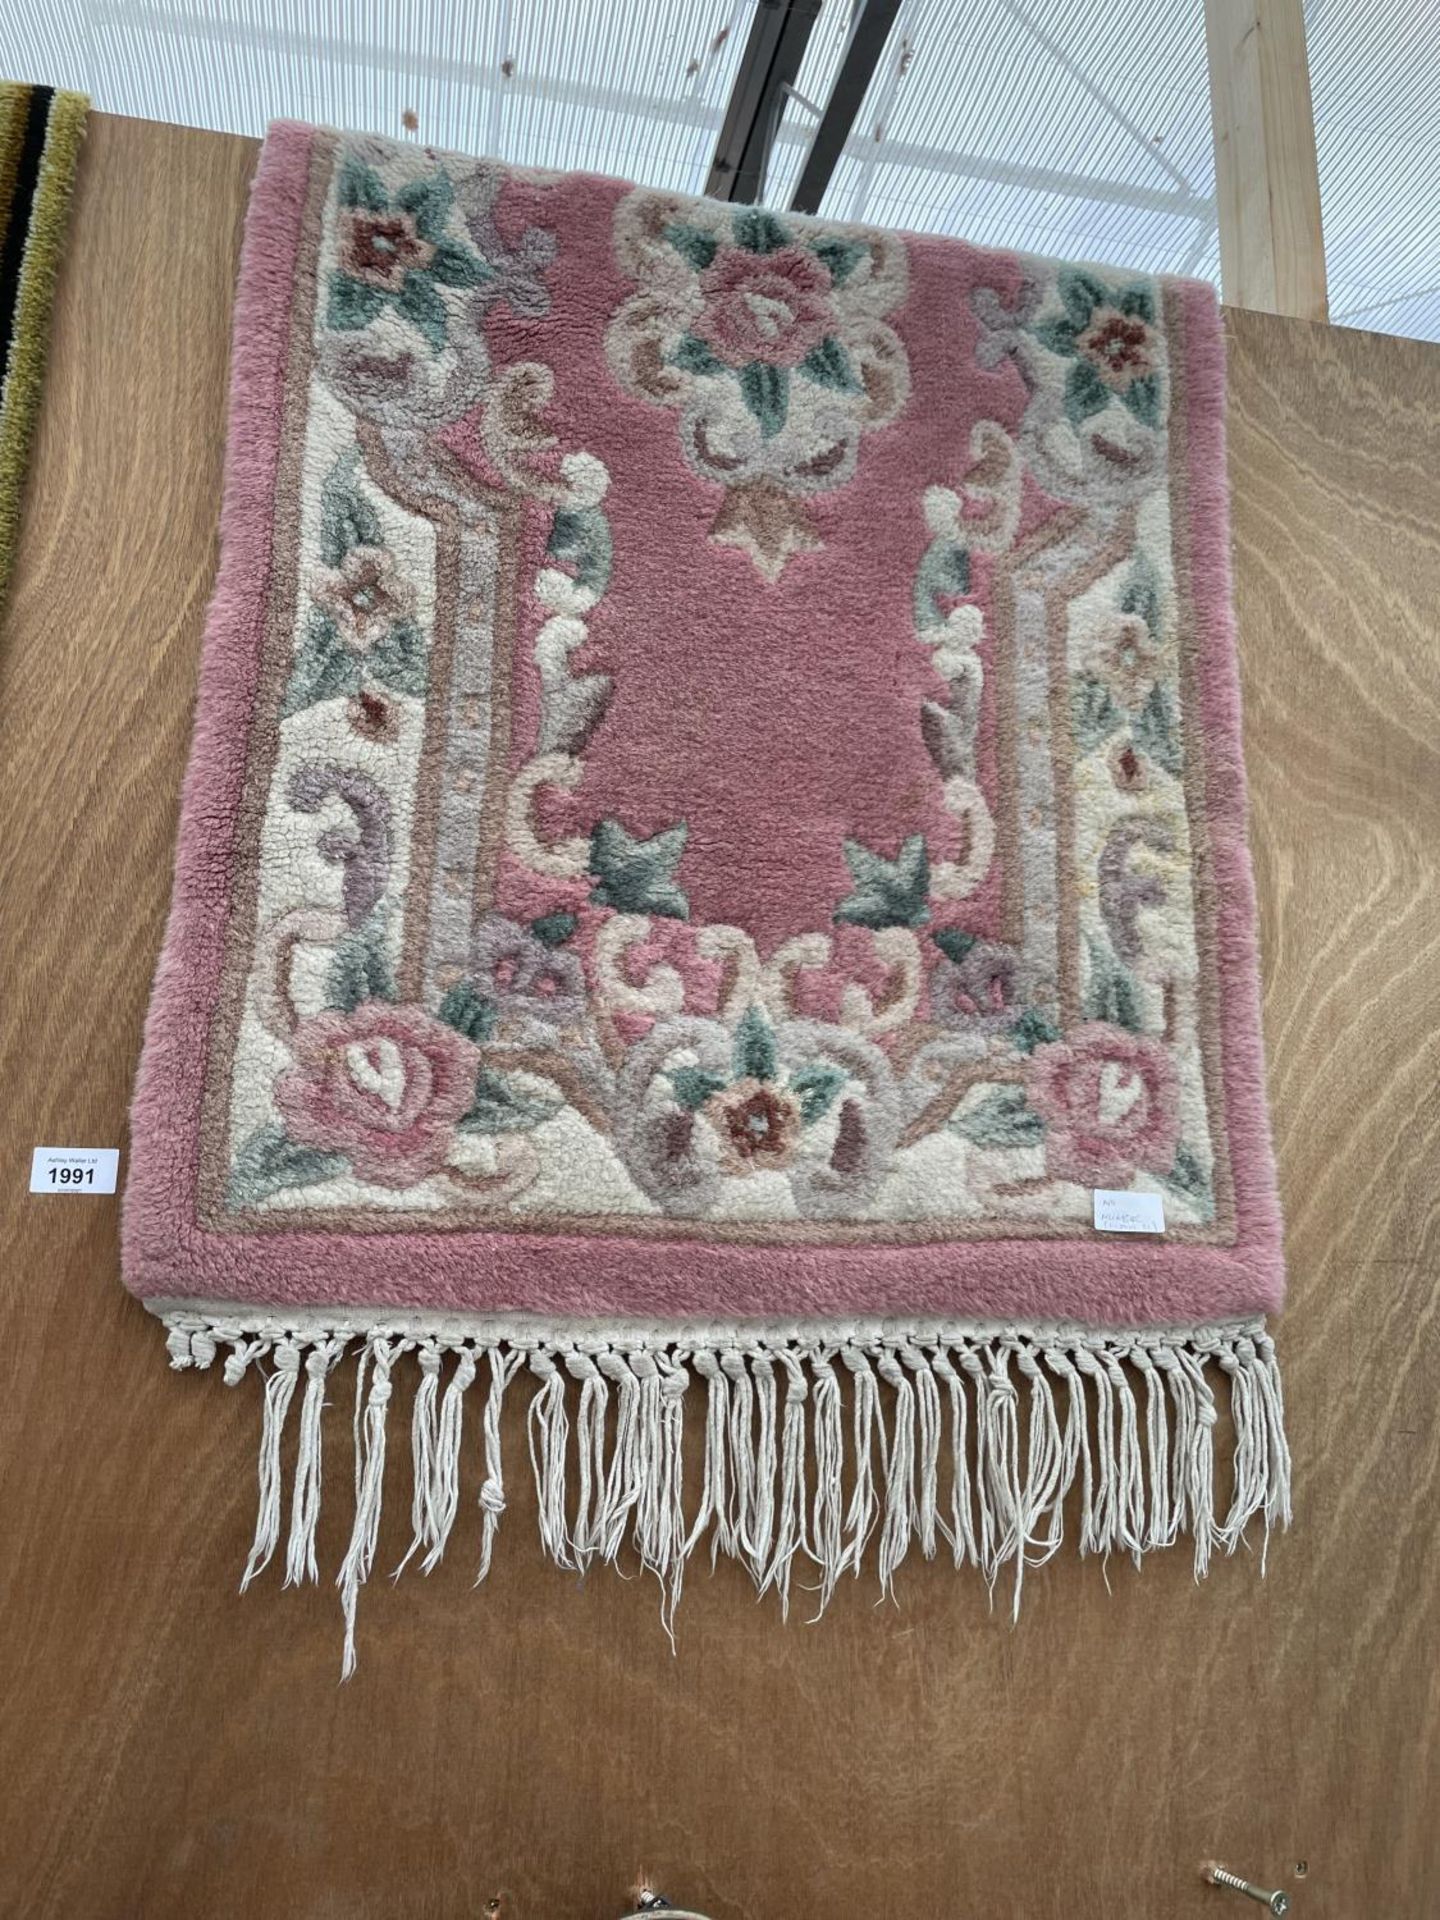 A SMALL PINK PATTERNED RUG